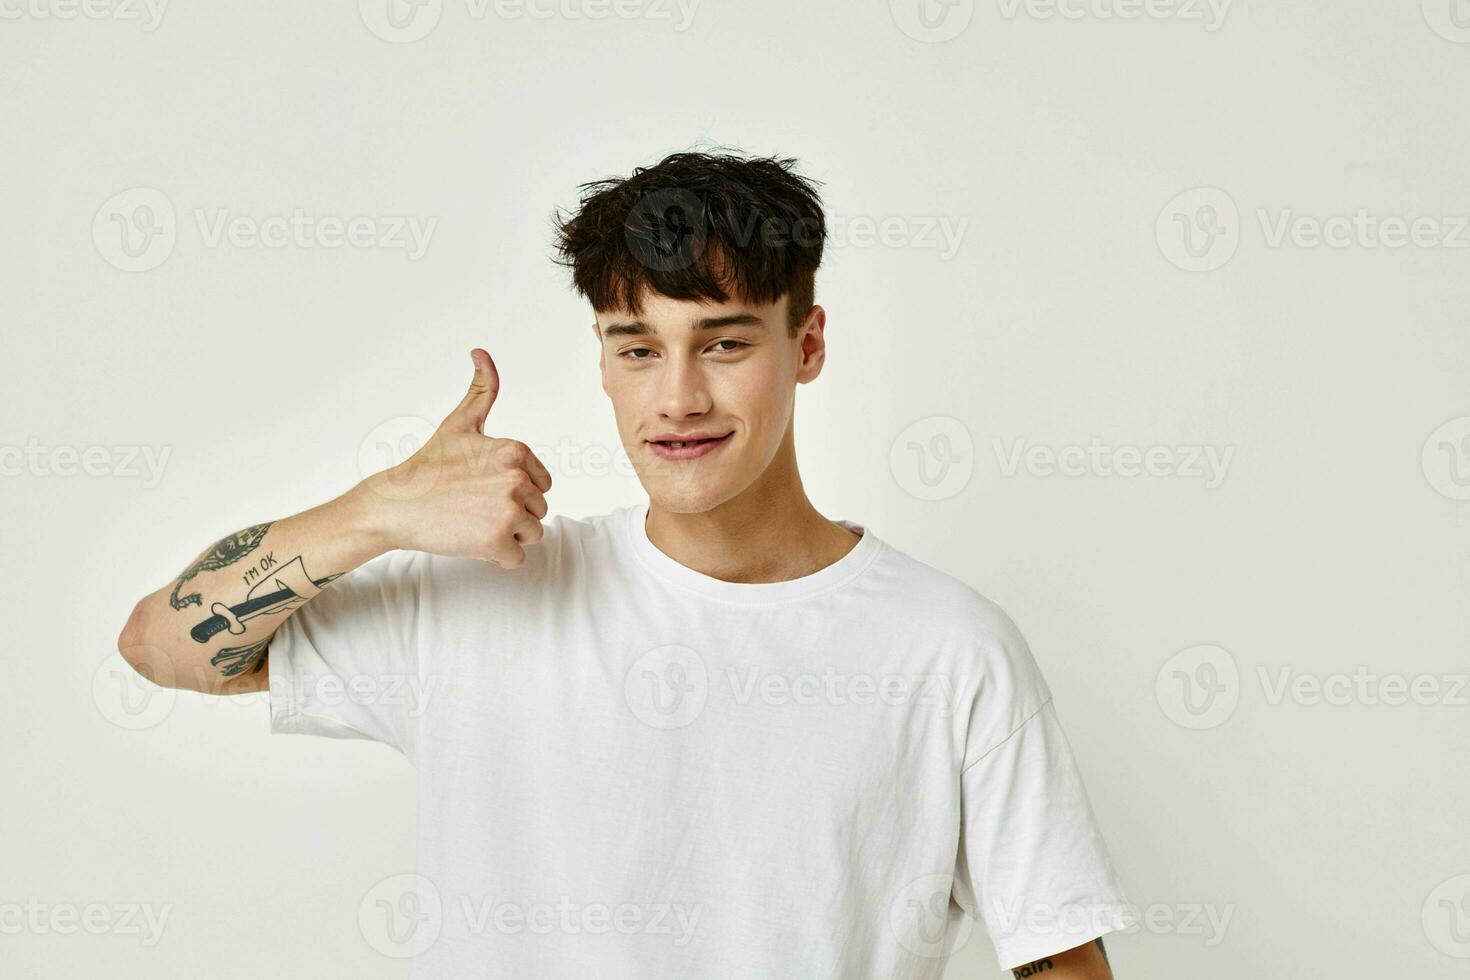 A young man modern youth style white t-shirt tattoo on the arm Lifestyle unaltered photo